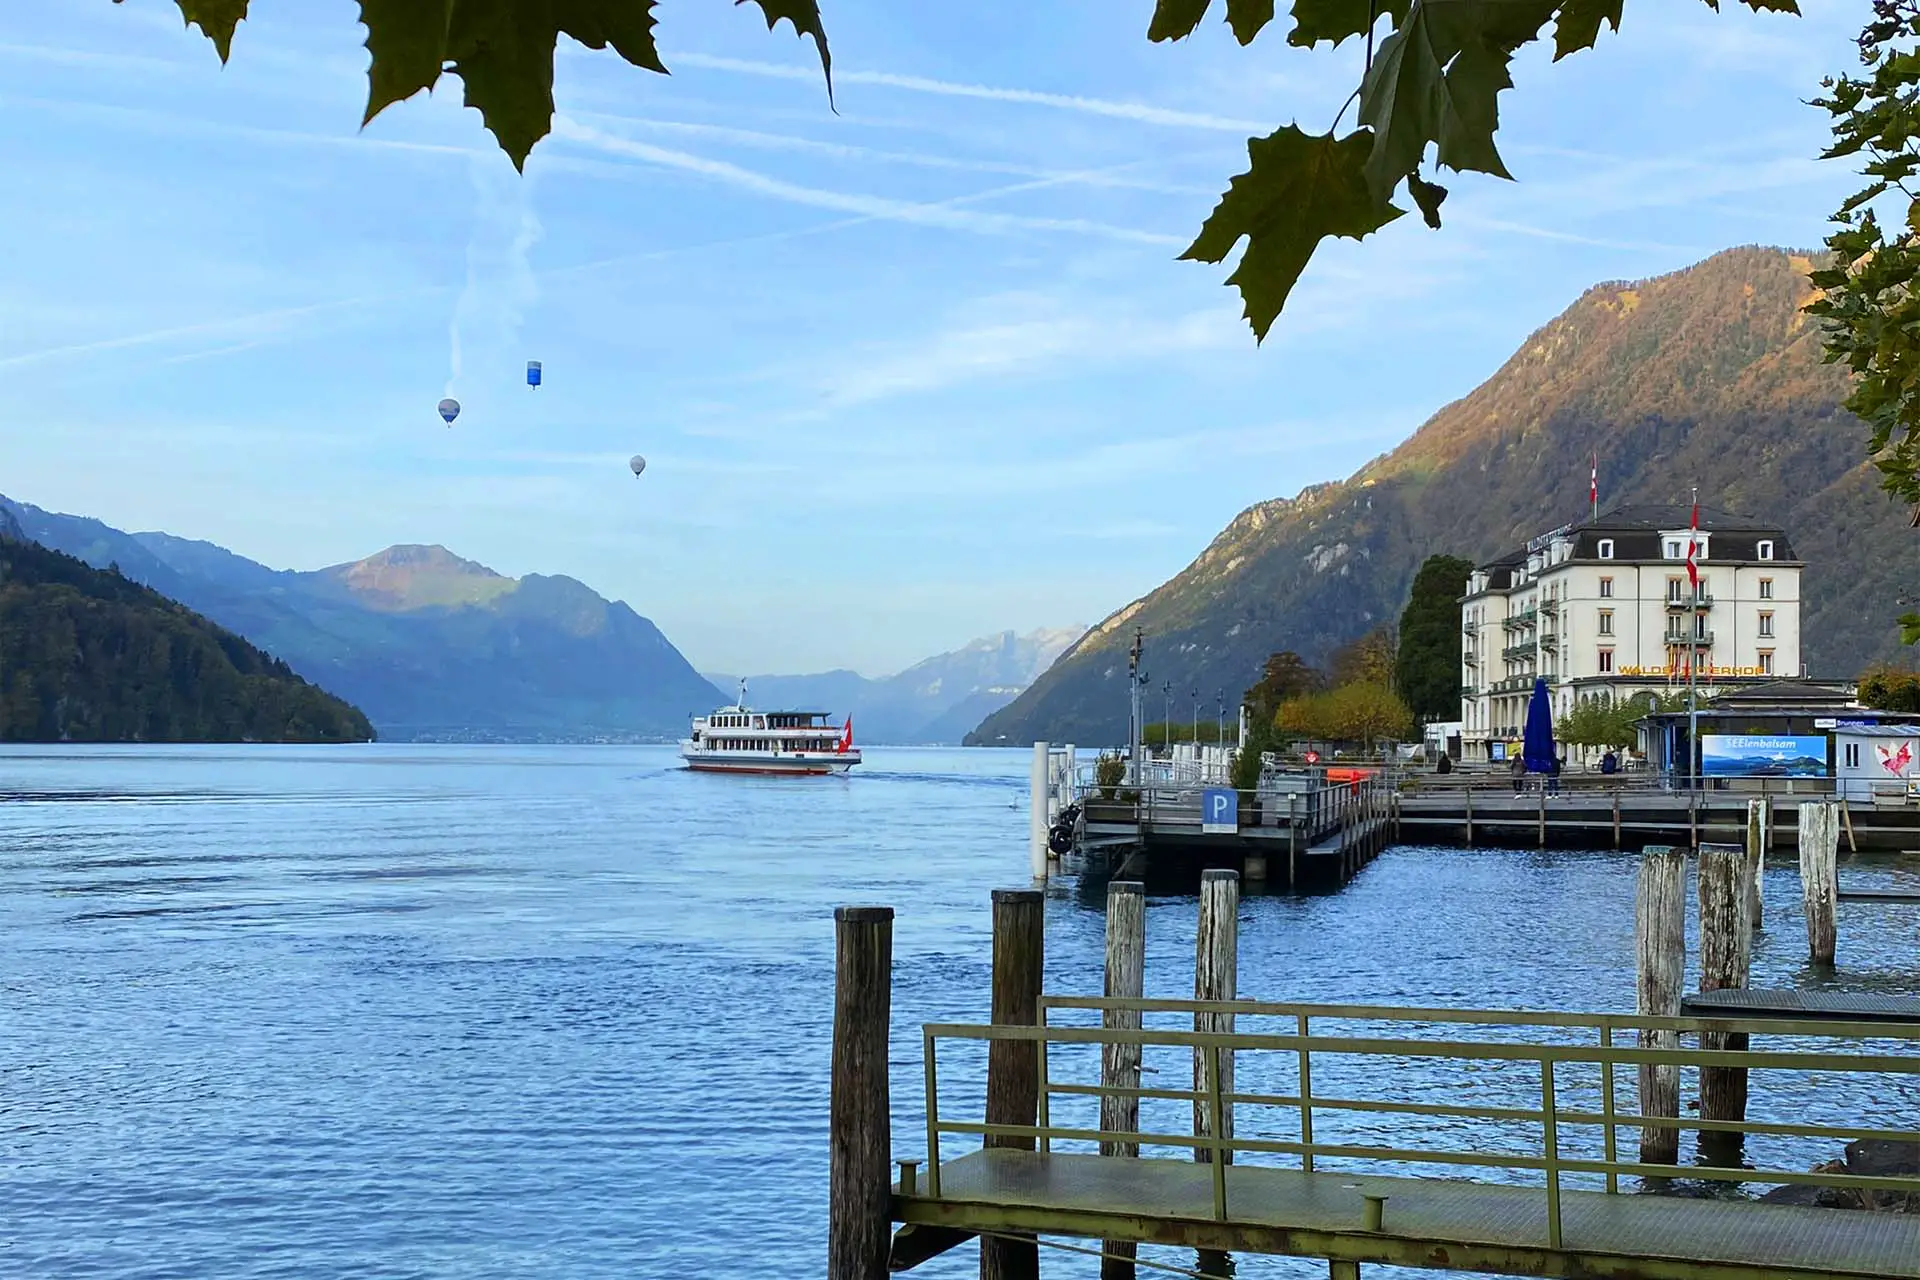 Brunnen is one of the most picturesque places at Lake Lucerne and located in the heart of Switzerland.